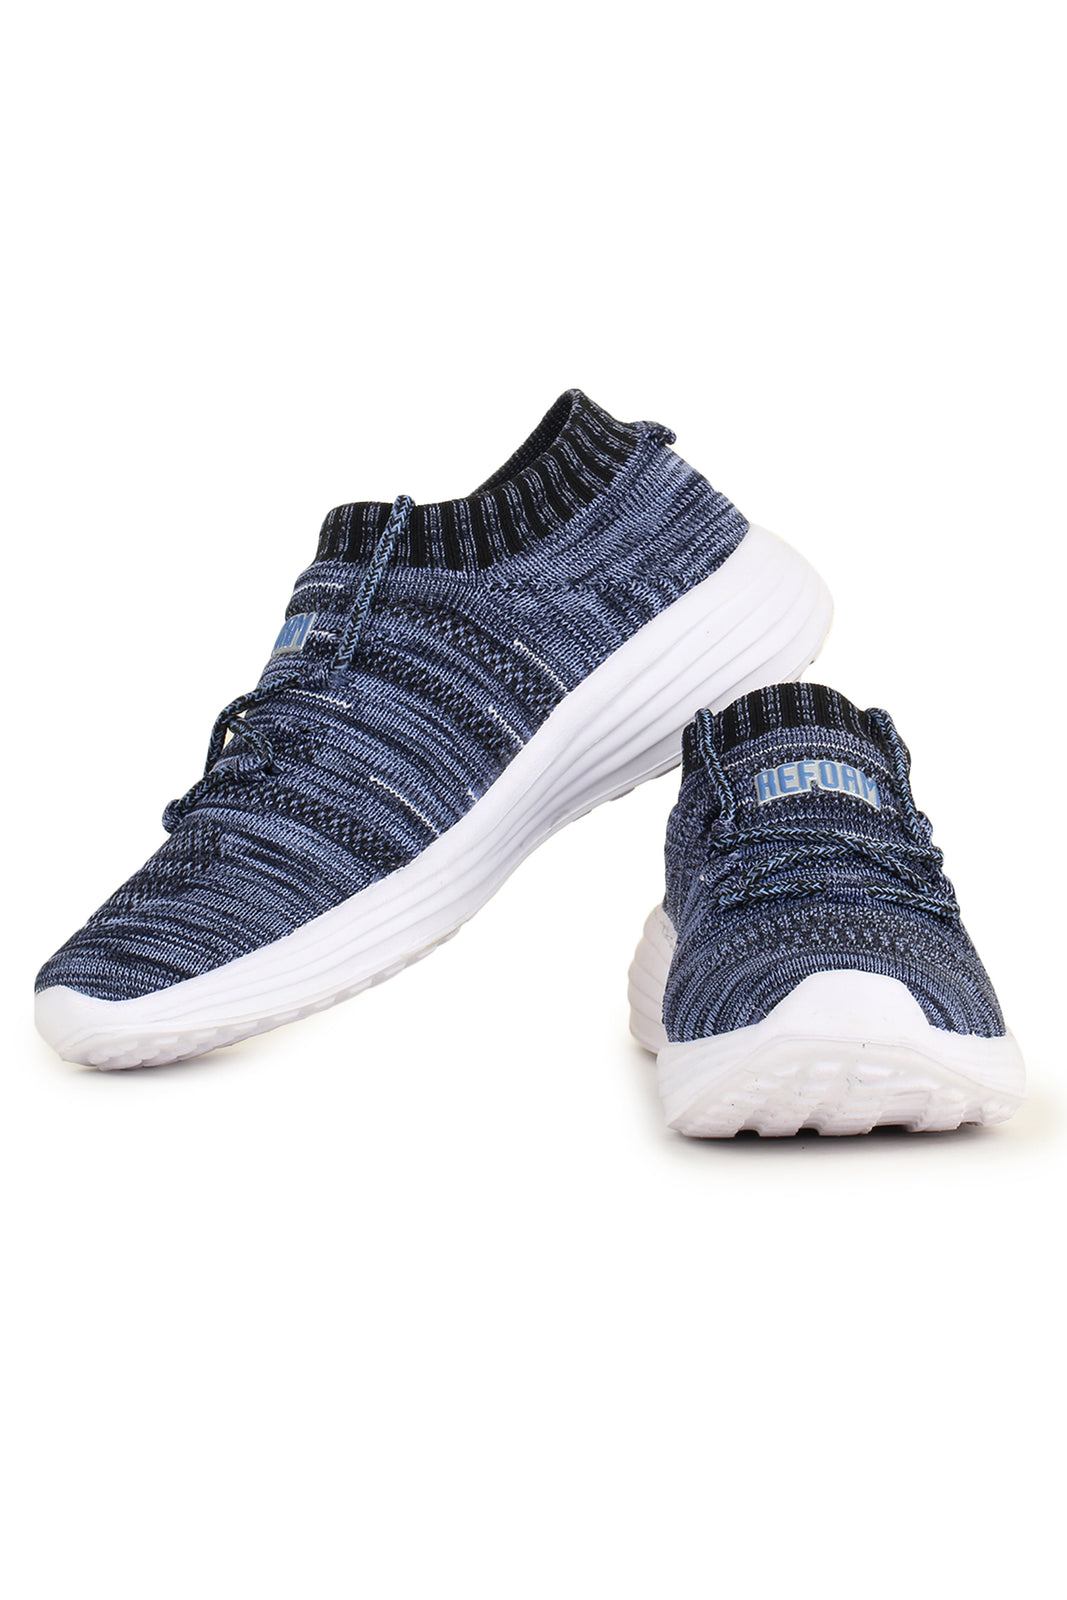 Grey Solid Mesh Lace Up Running Sport Shoes For Women